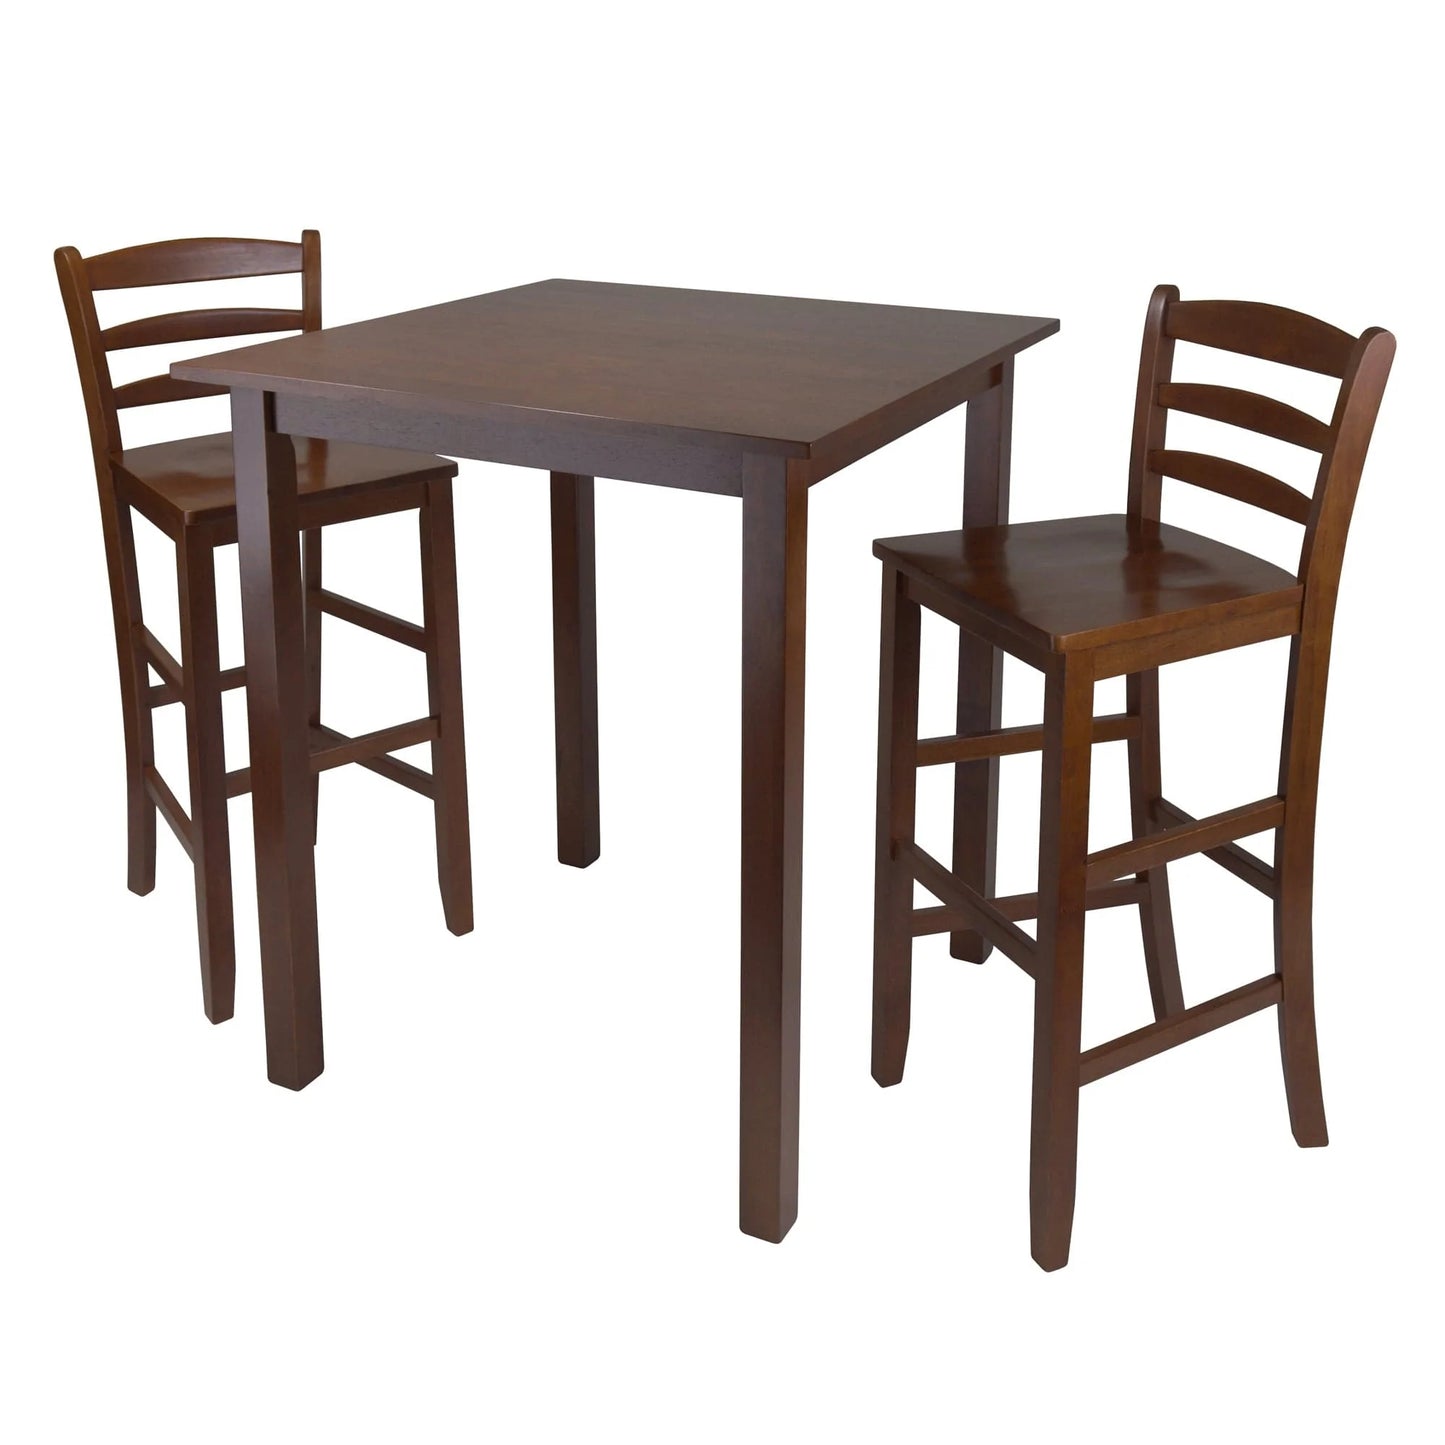 WINSOME Pub Table Set Parkland 3-Pc High Table with Ladder-back Bar Stools, Walnut